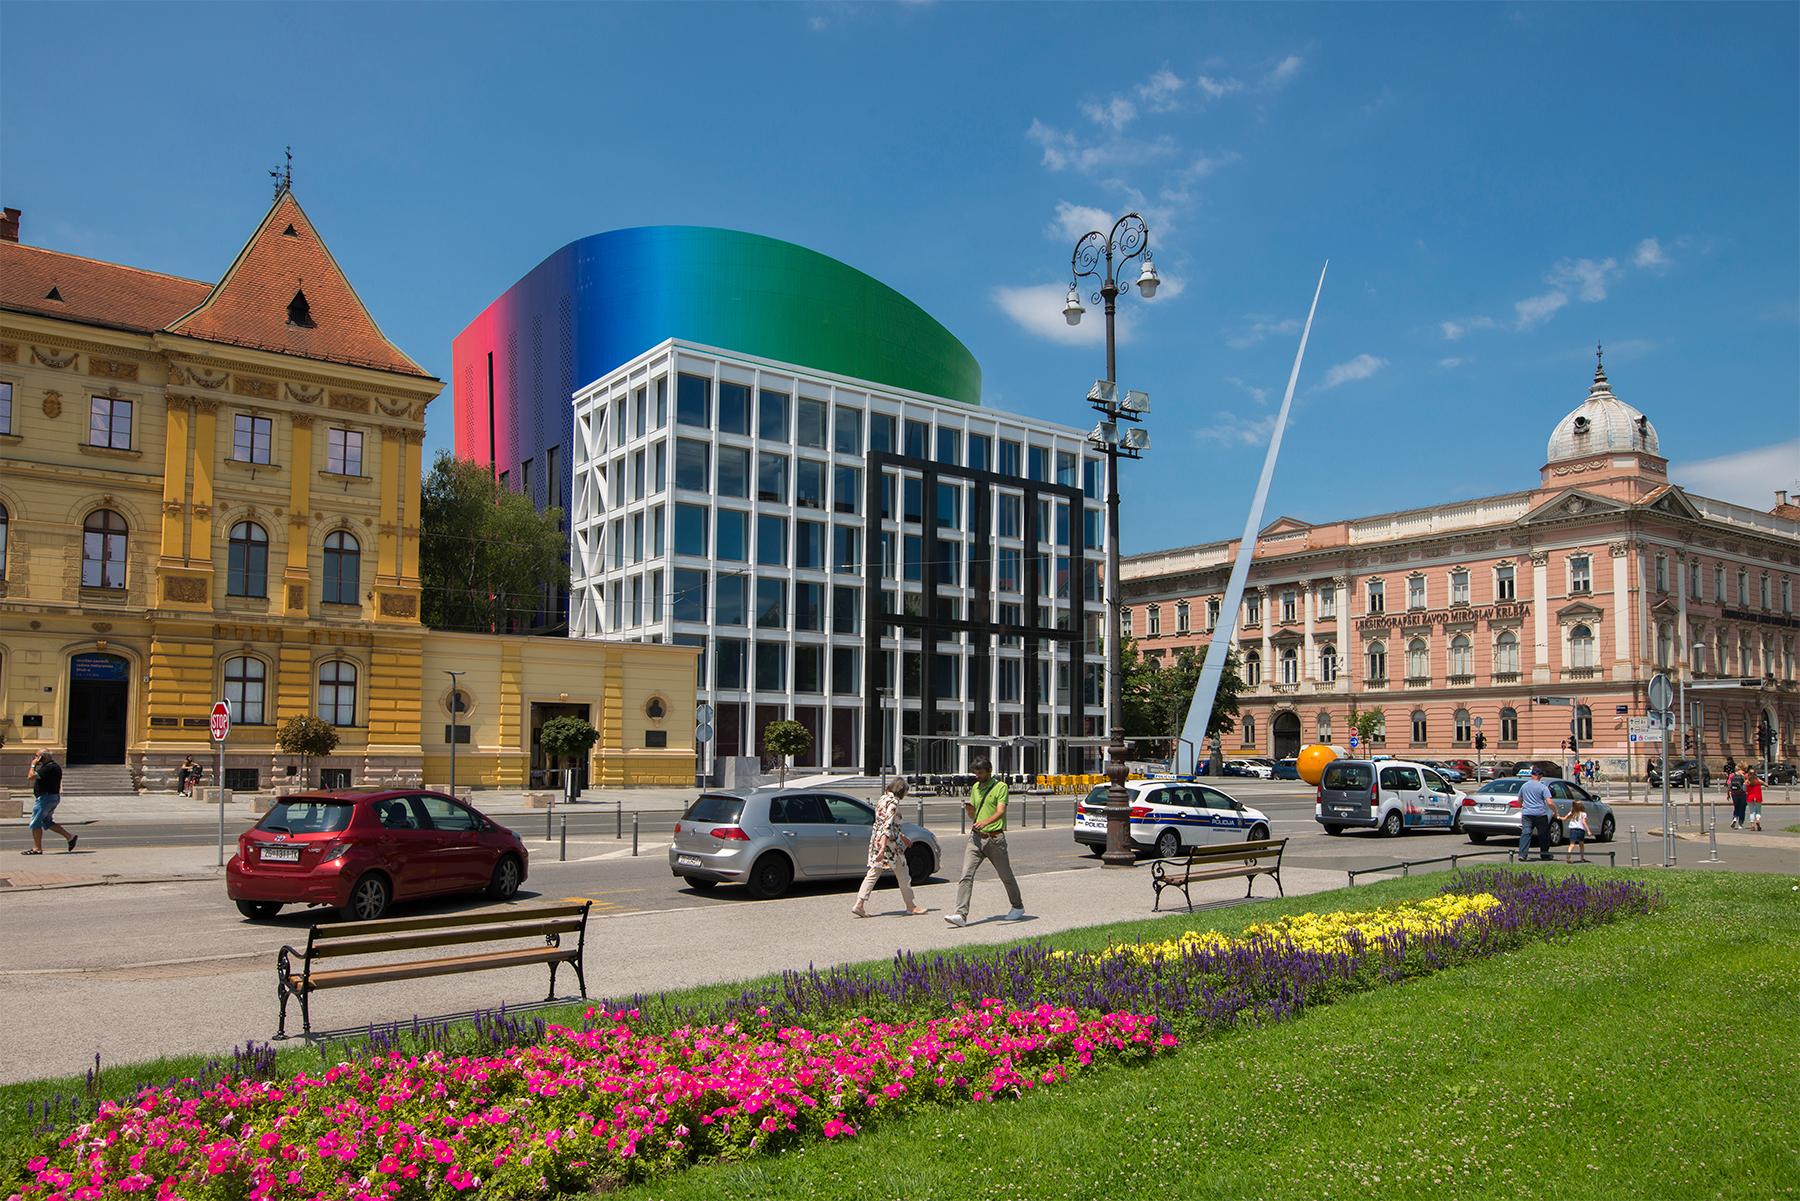 Cover image of this place Academy of Music, Zagreb